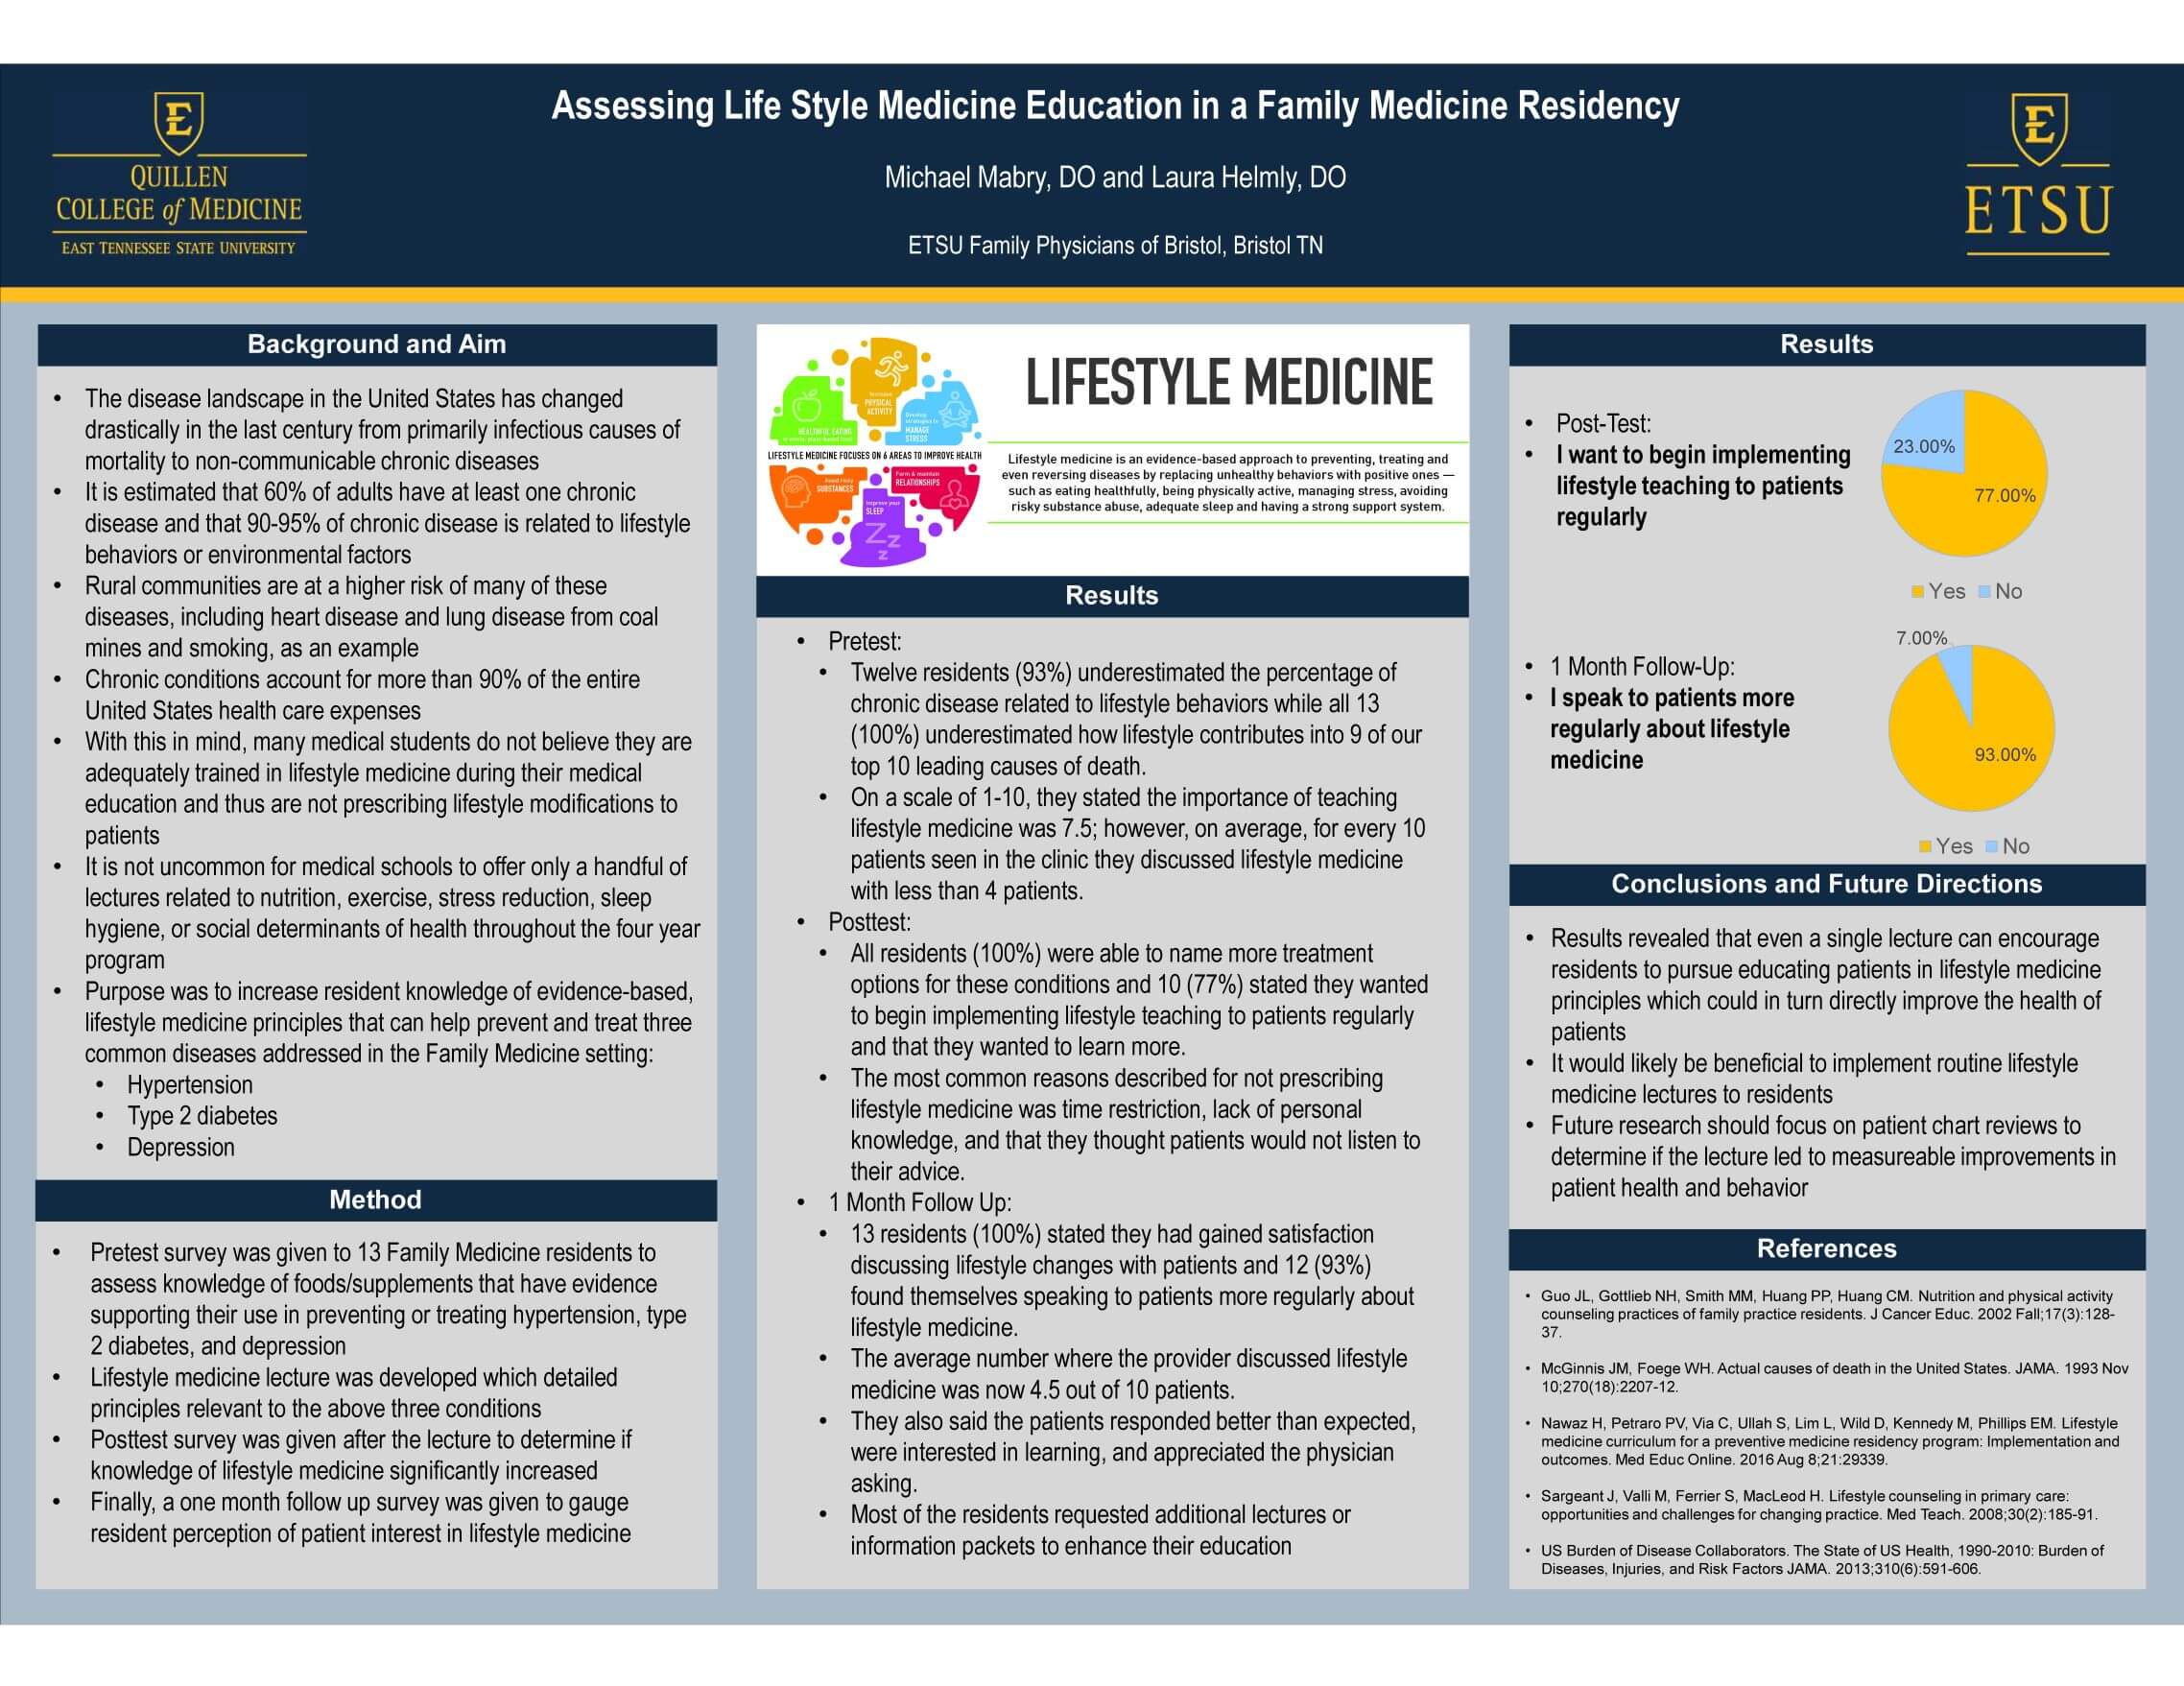 Assessing Life Style Medicine Education in a Family Medicine Residency